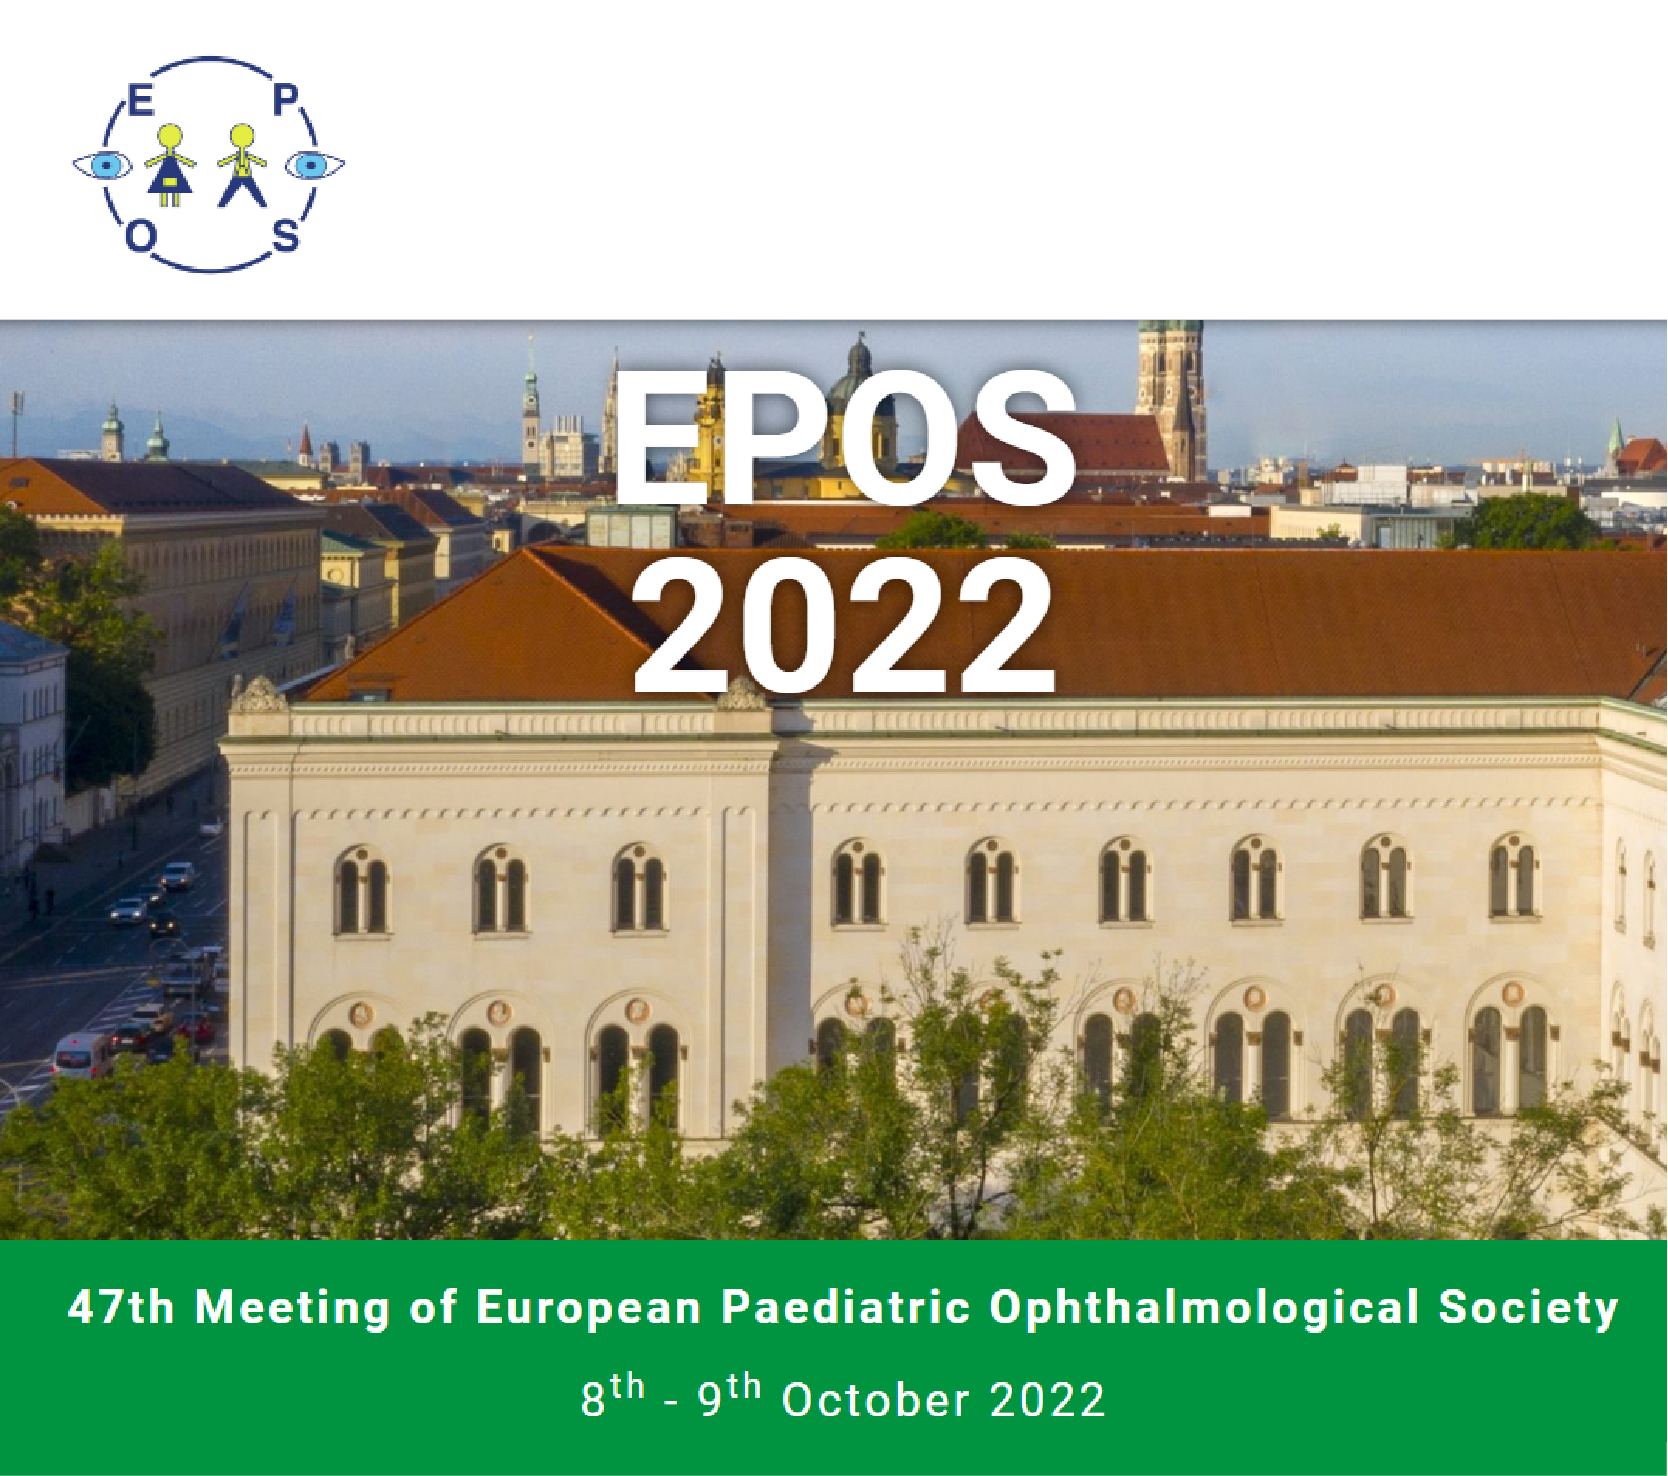 The 48th Annual Meeting of EPOS 2022